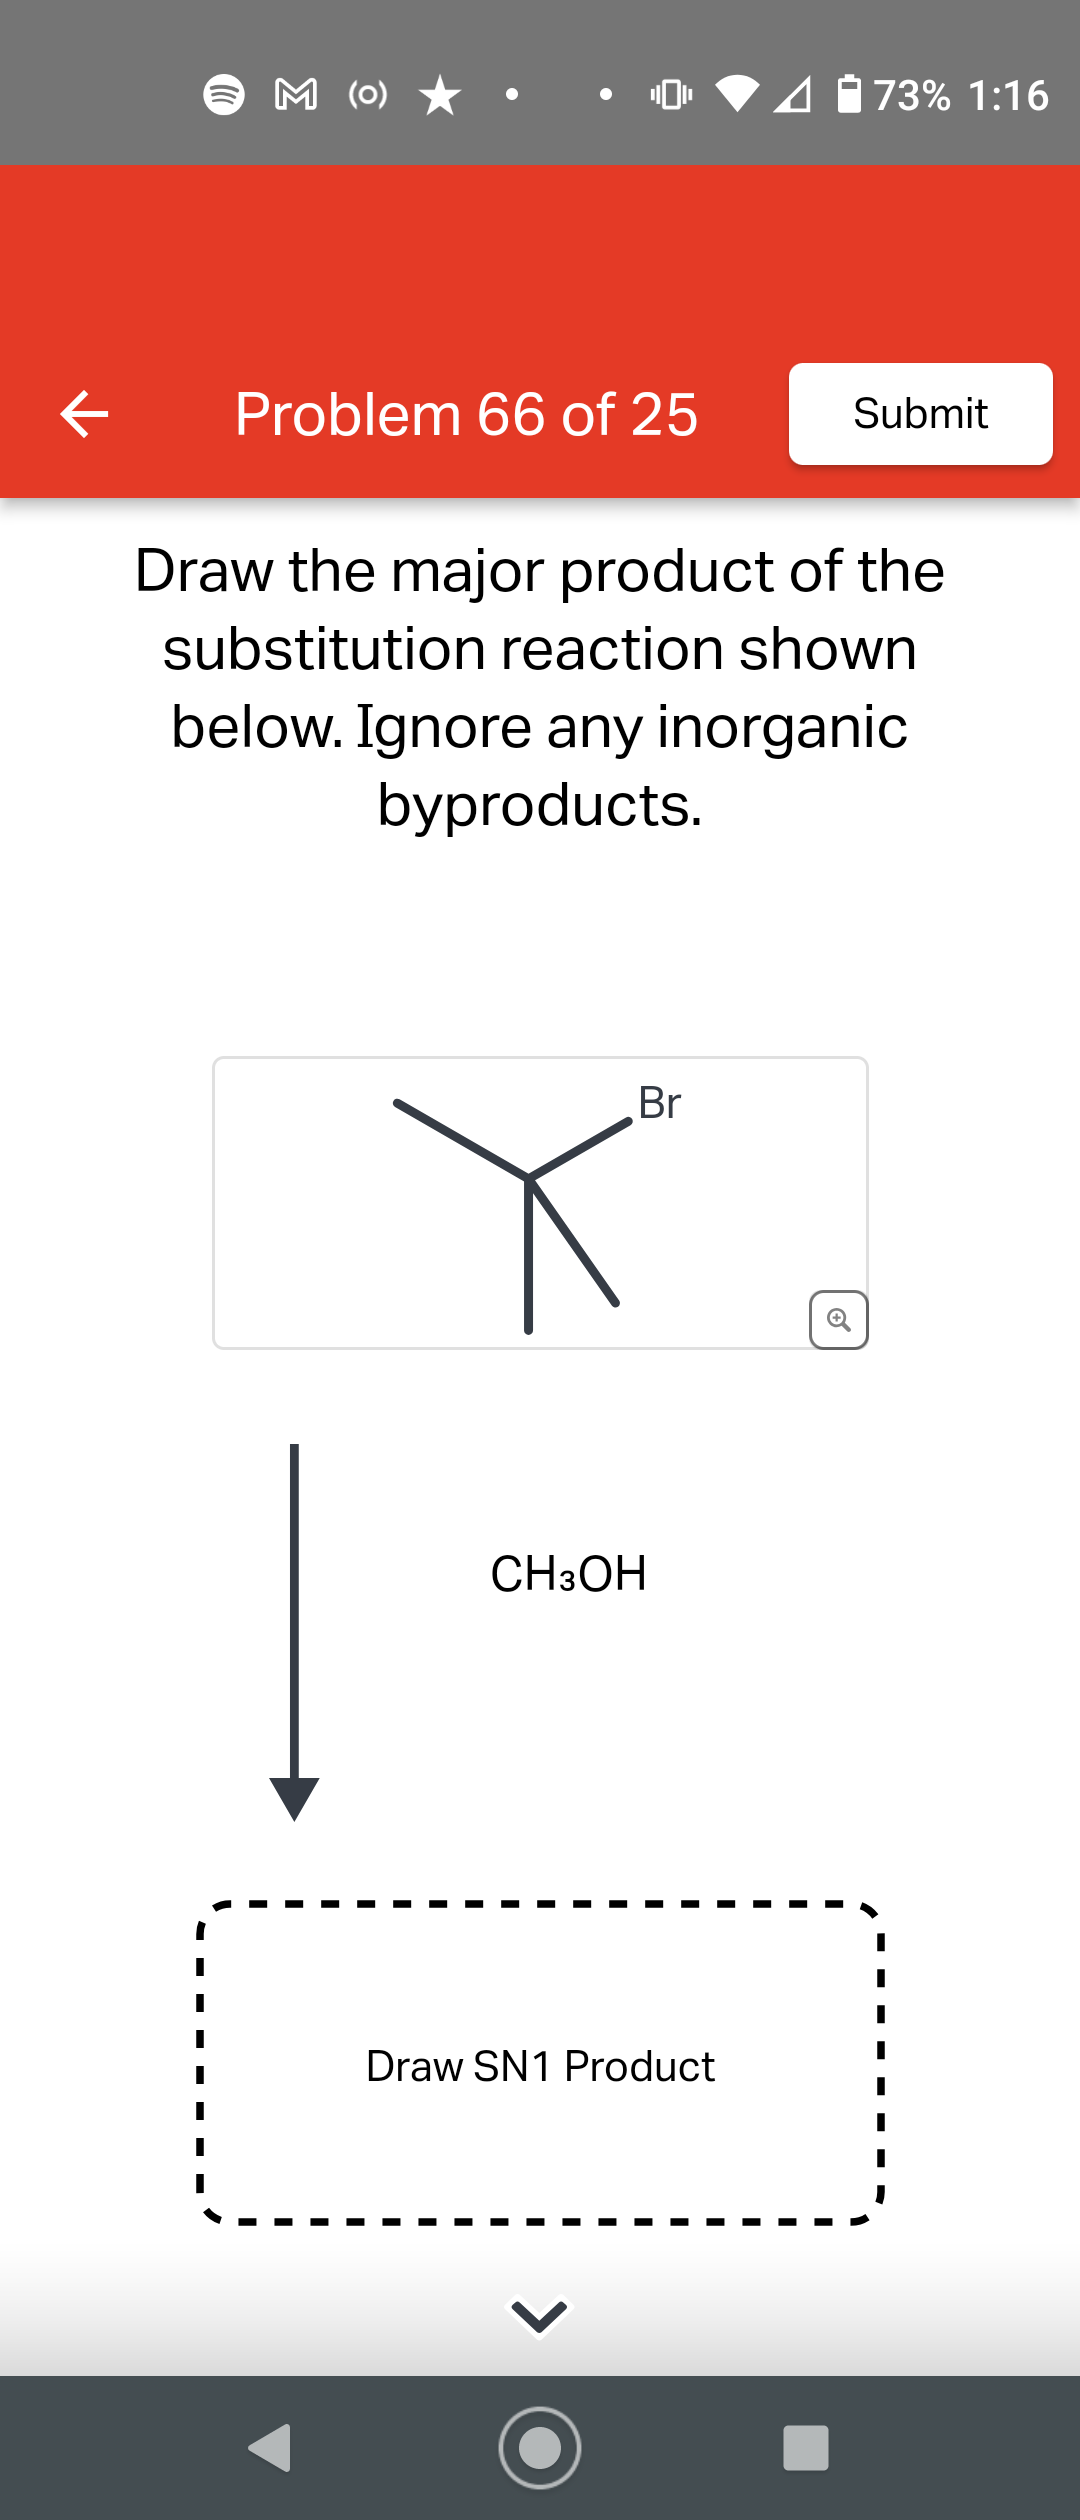 ())))
M (0) ★
Problem 66 of 25
Br
Draw the major product of the
substitution reaction shown
below. Ignore any inorganic
byproducts.
CH3OH
473% 1:16
Draw SN1 Product
Submit